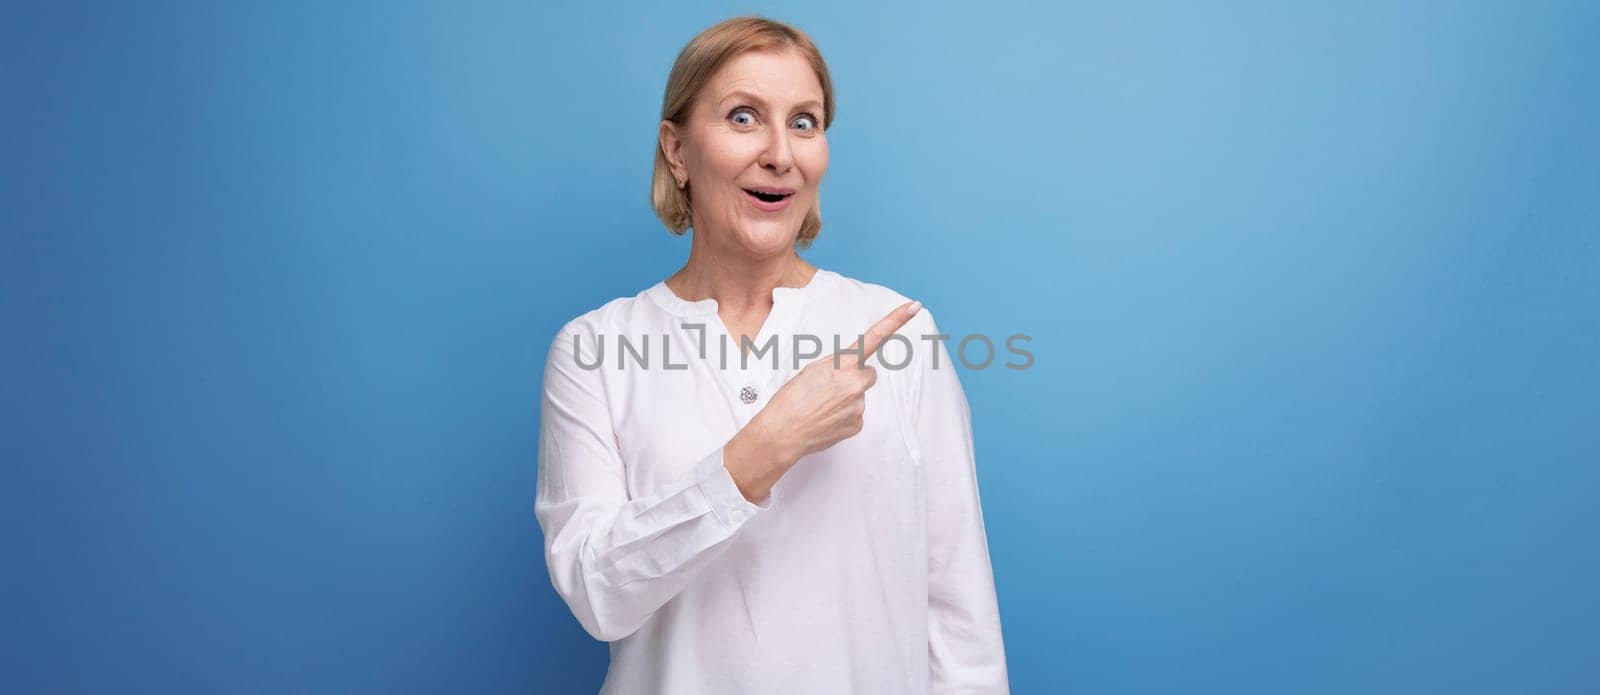 confident blond middle aged woman in white blouse pointing her finger to the side on studio background with copyspace.